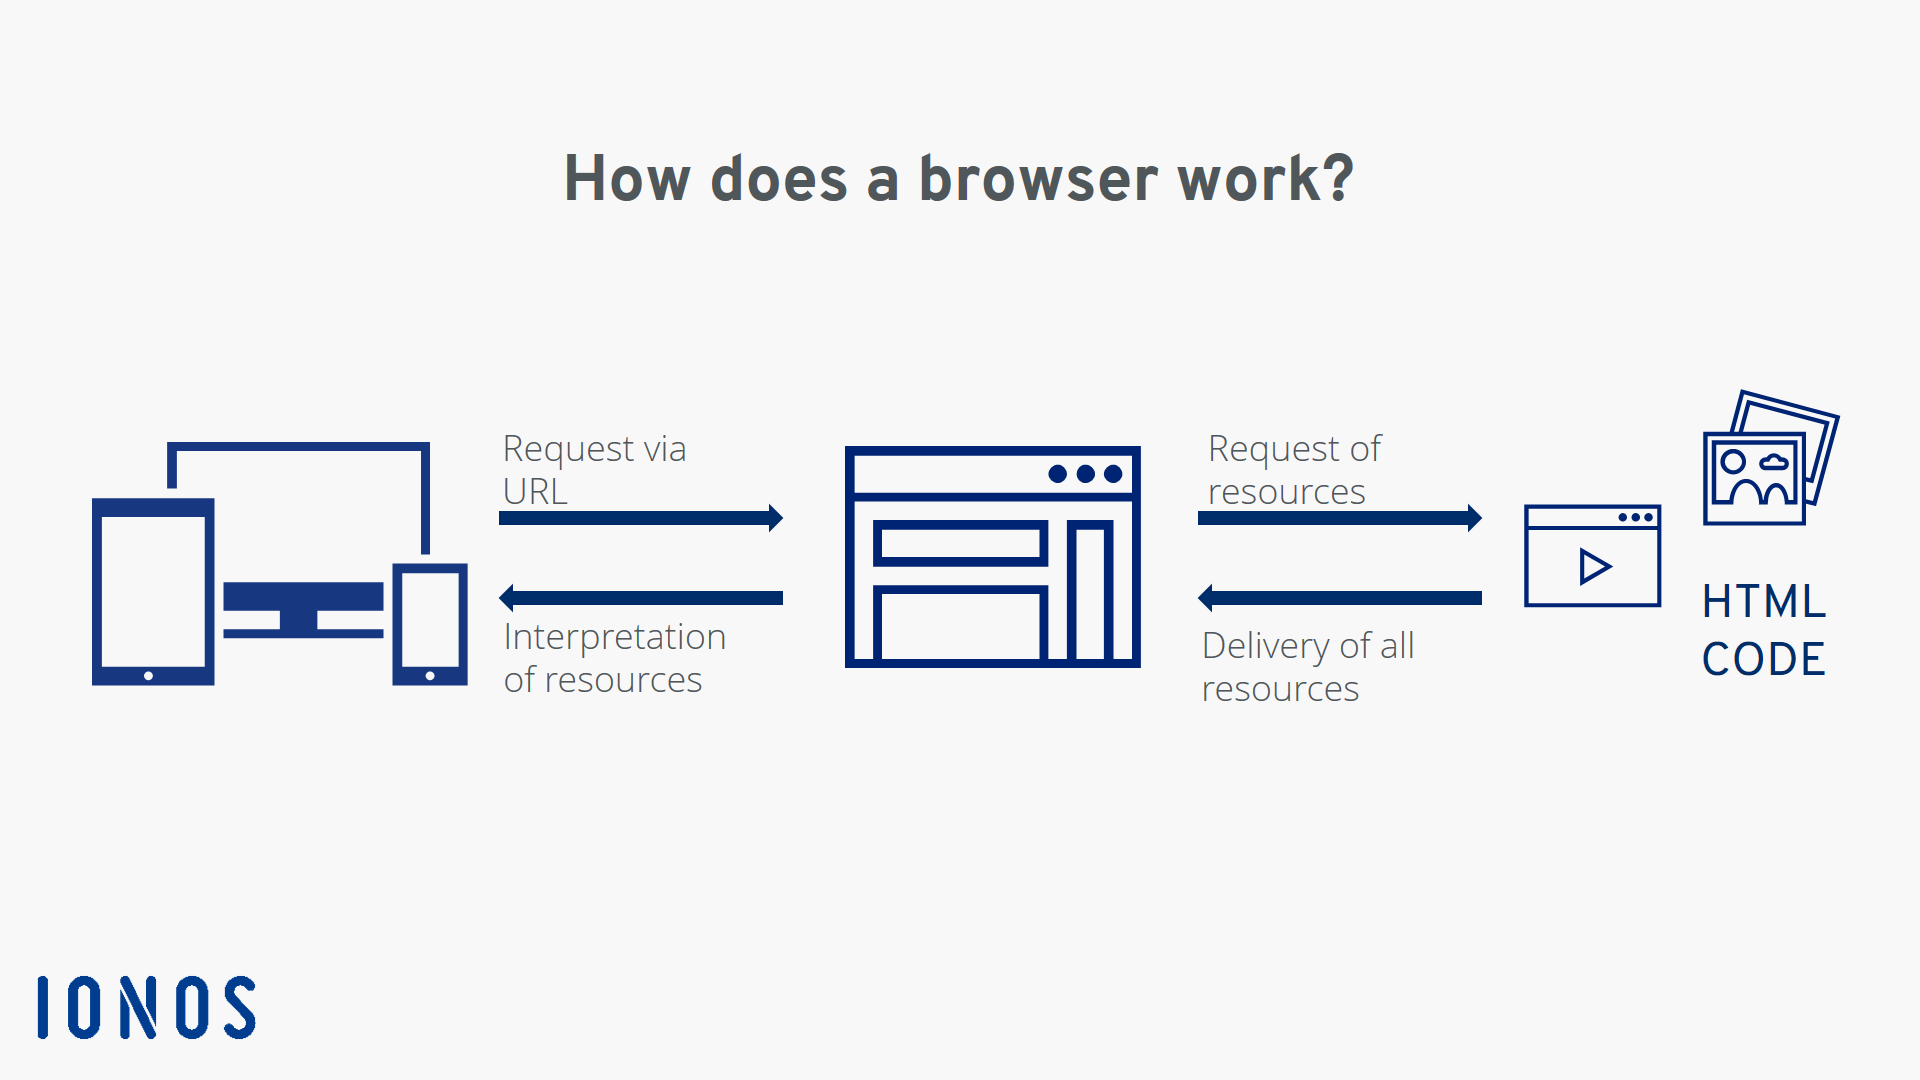 Communication between the end device, browser, and a website’s resources